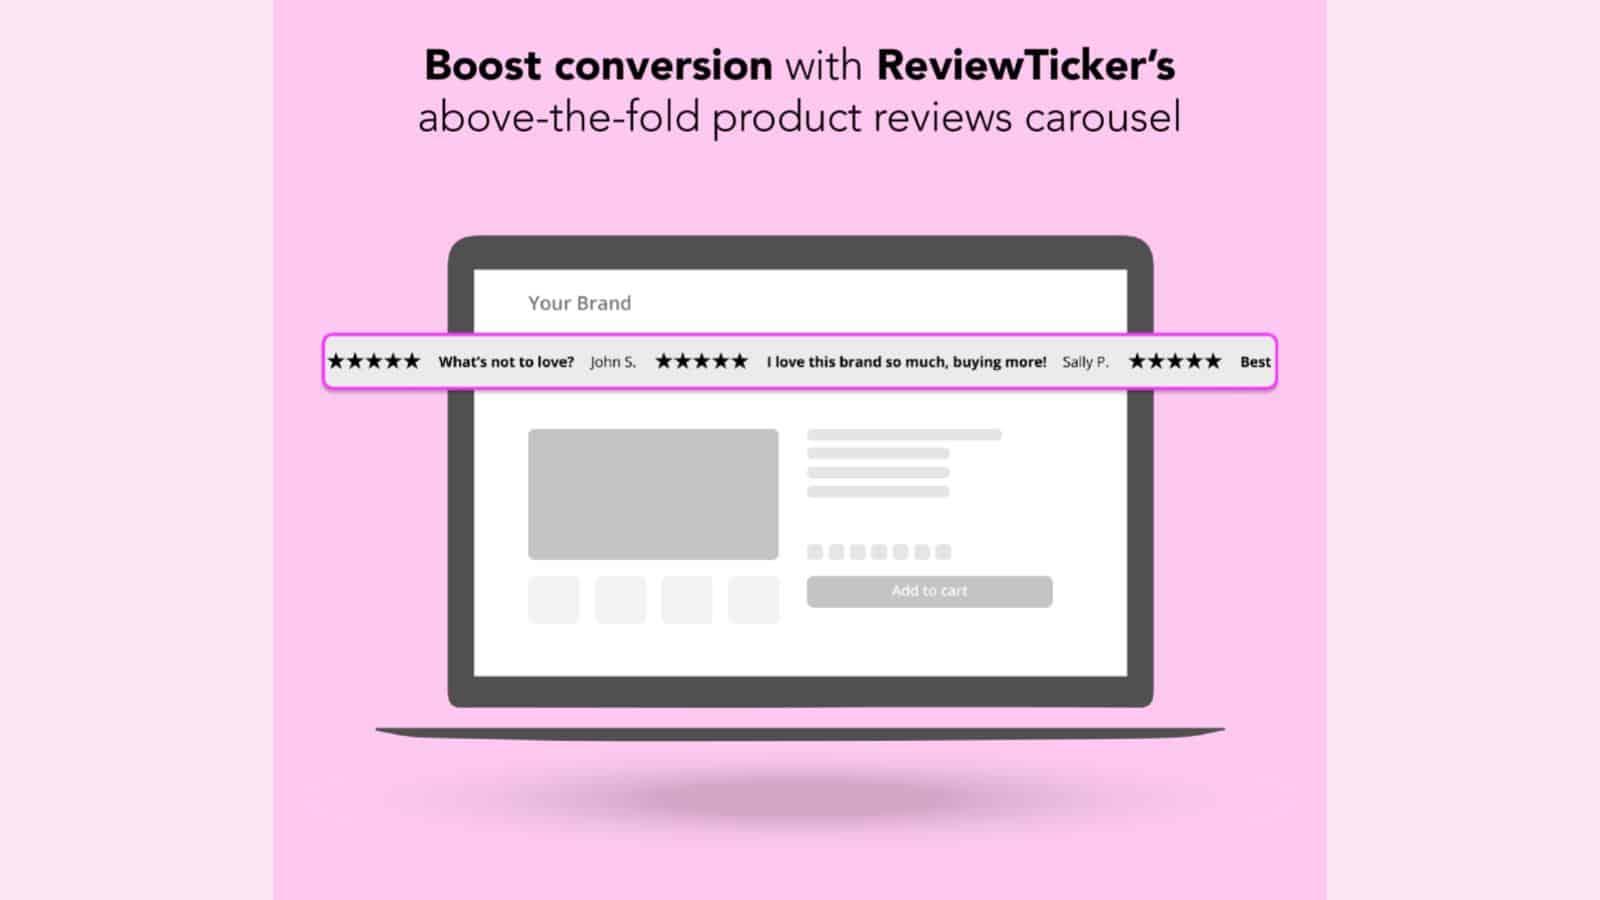 ReviewTicker Review Carousels